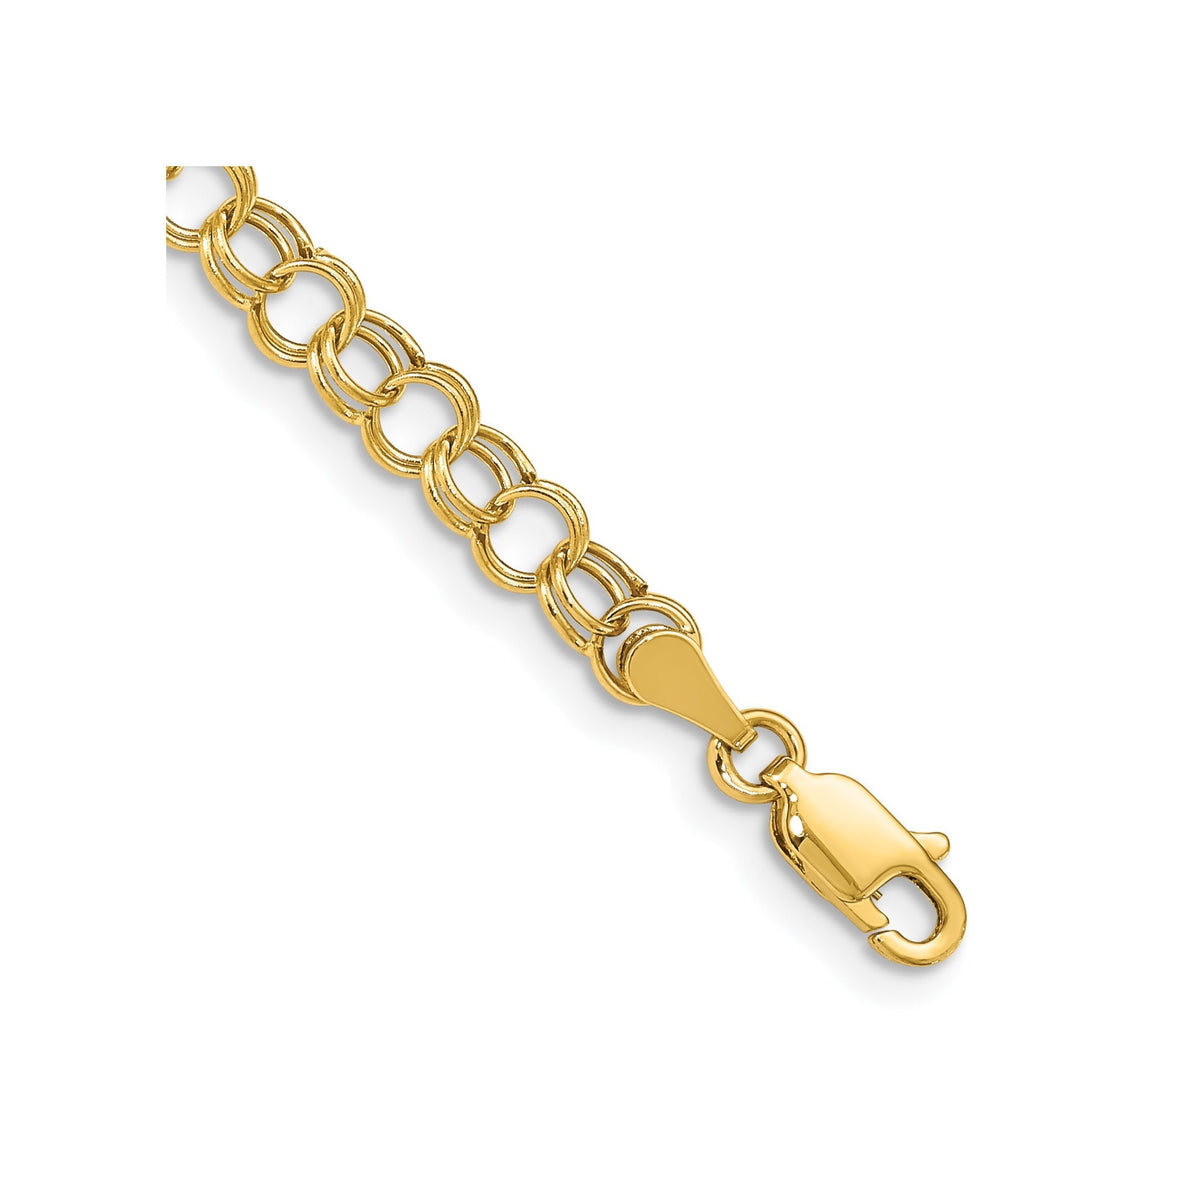 10k Yellow Gold Hollow Double Link Charm Bracelet 5mm / Gold Charm Bracelet /Gift Box Included /Double Charm Bracelet in Gold / Made in USA